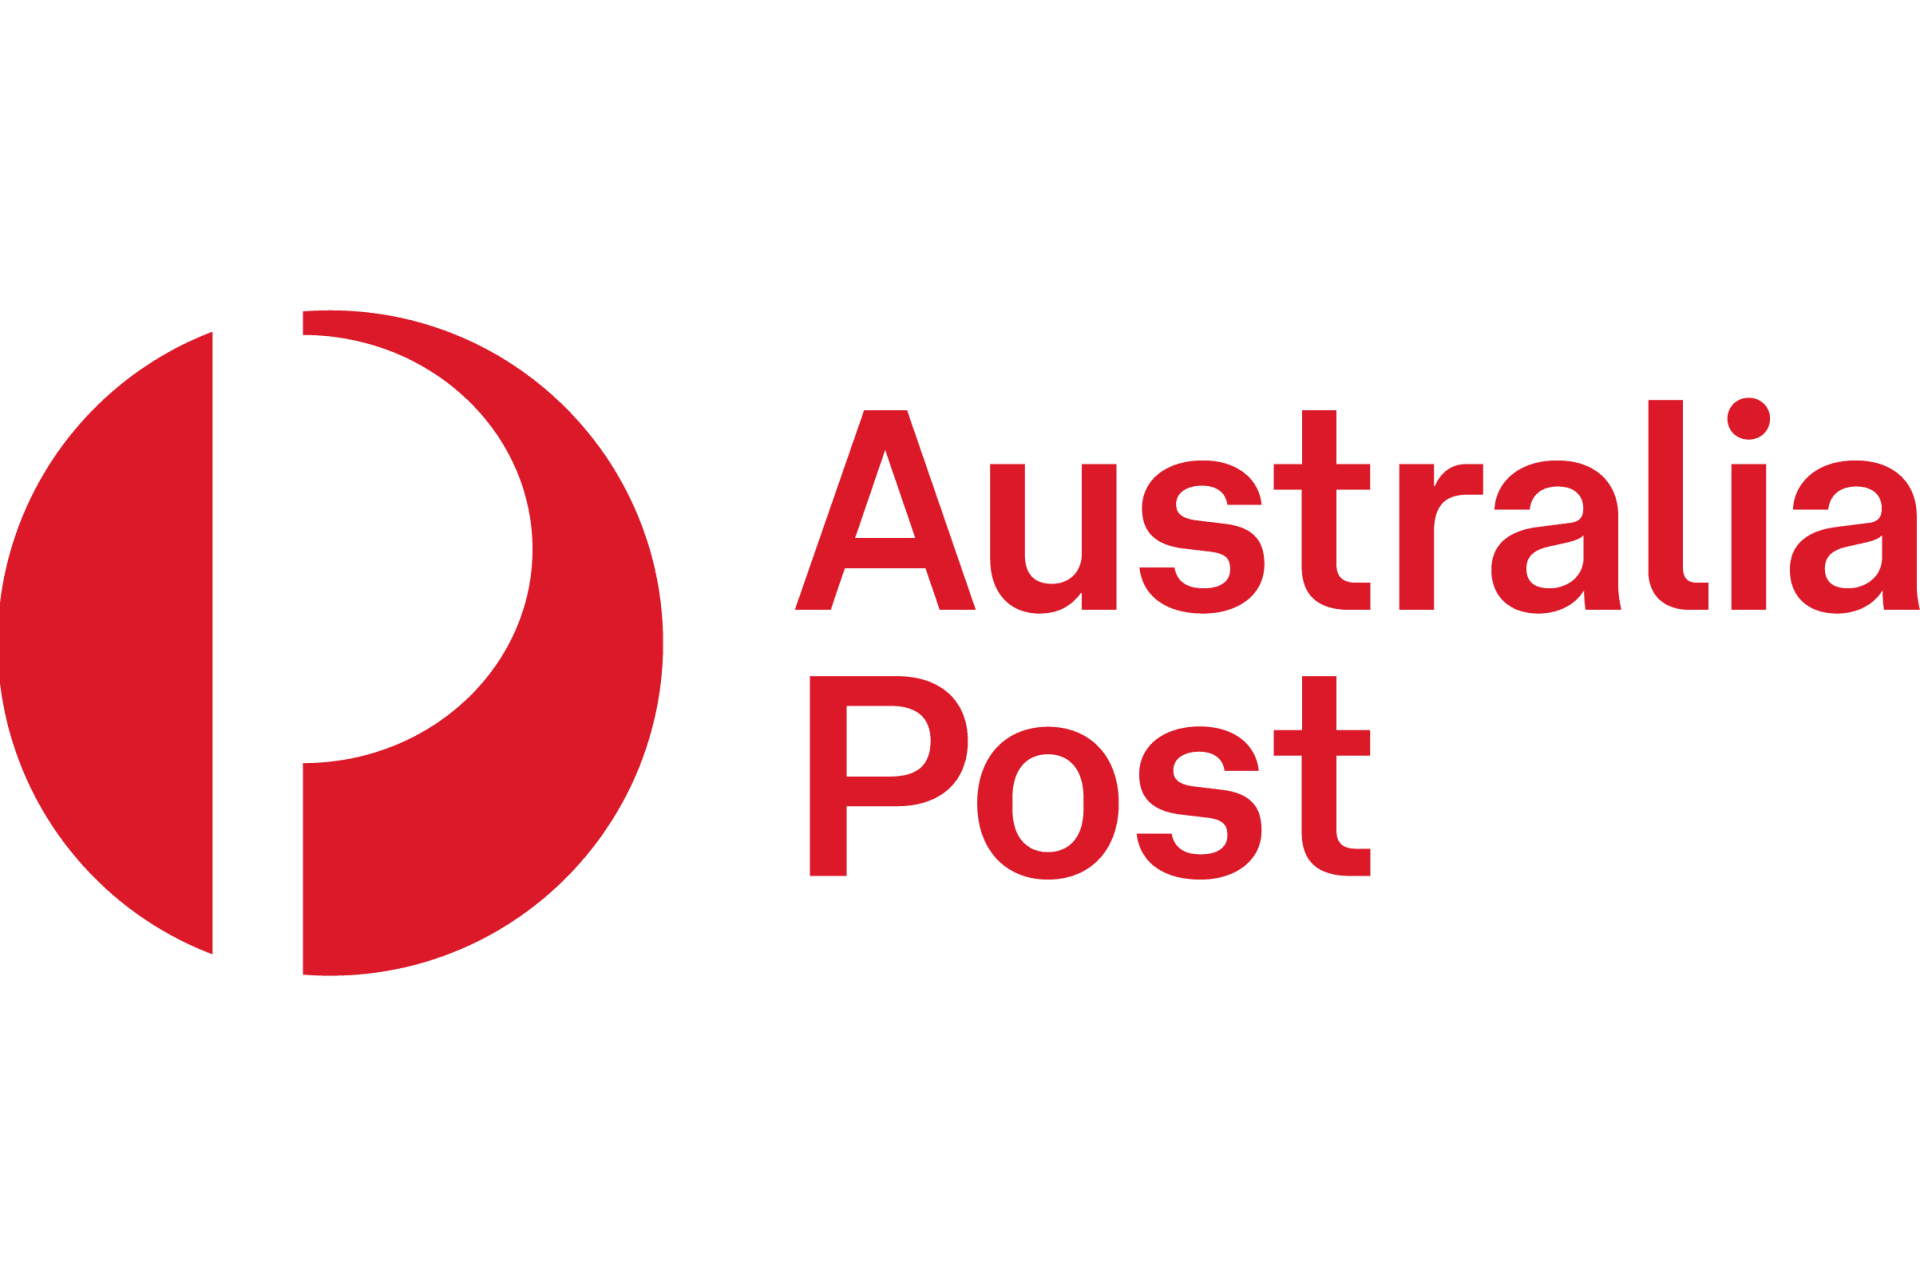 Narembeen Postal Services - Relocated